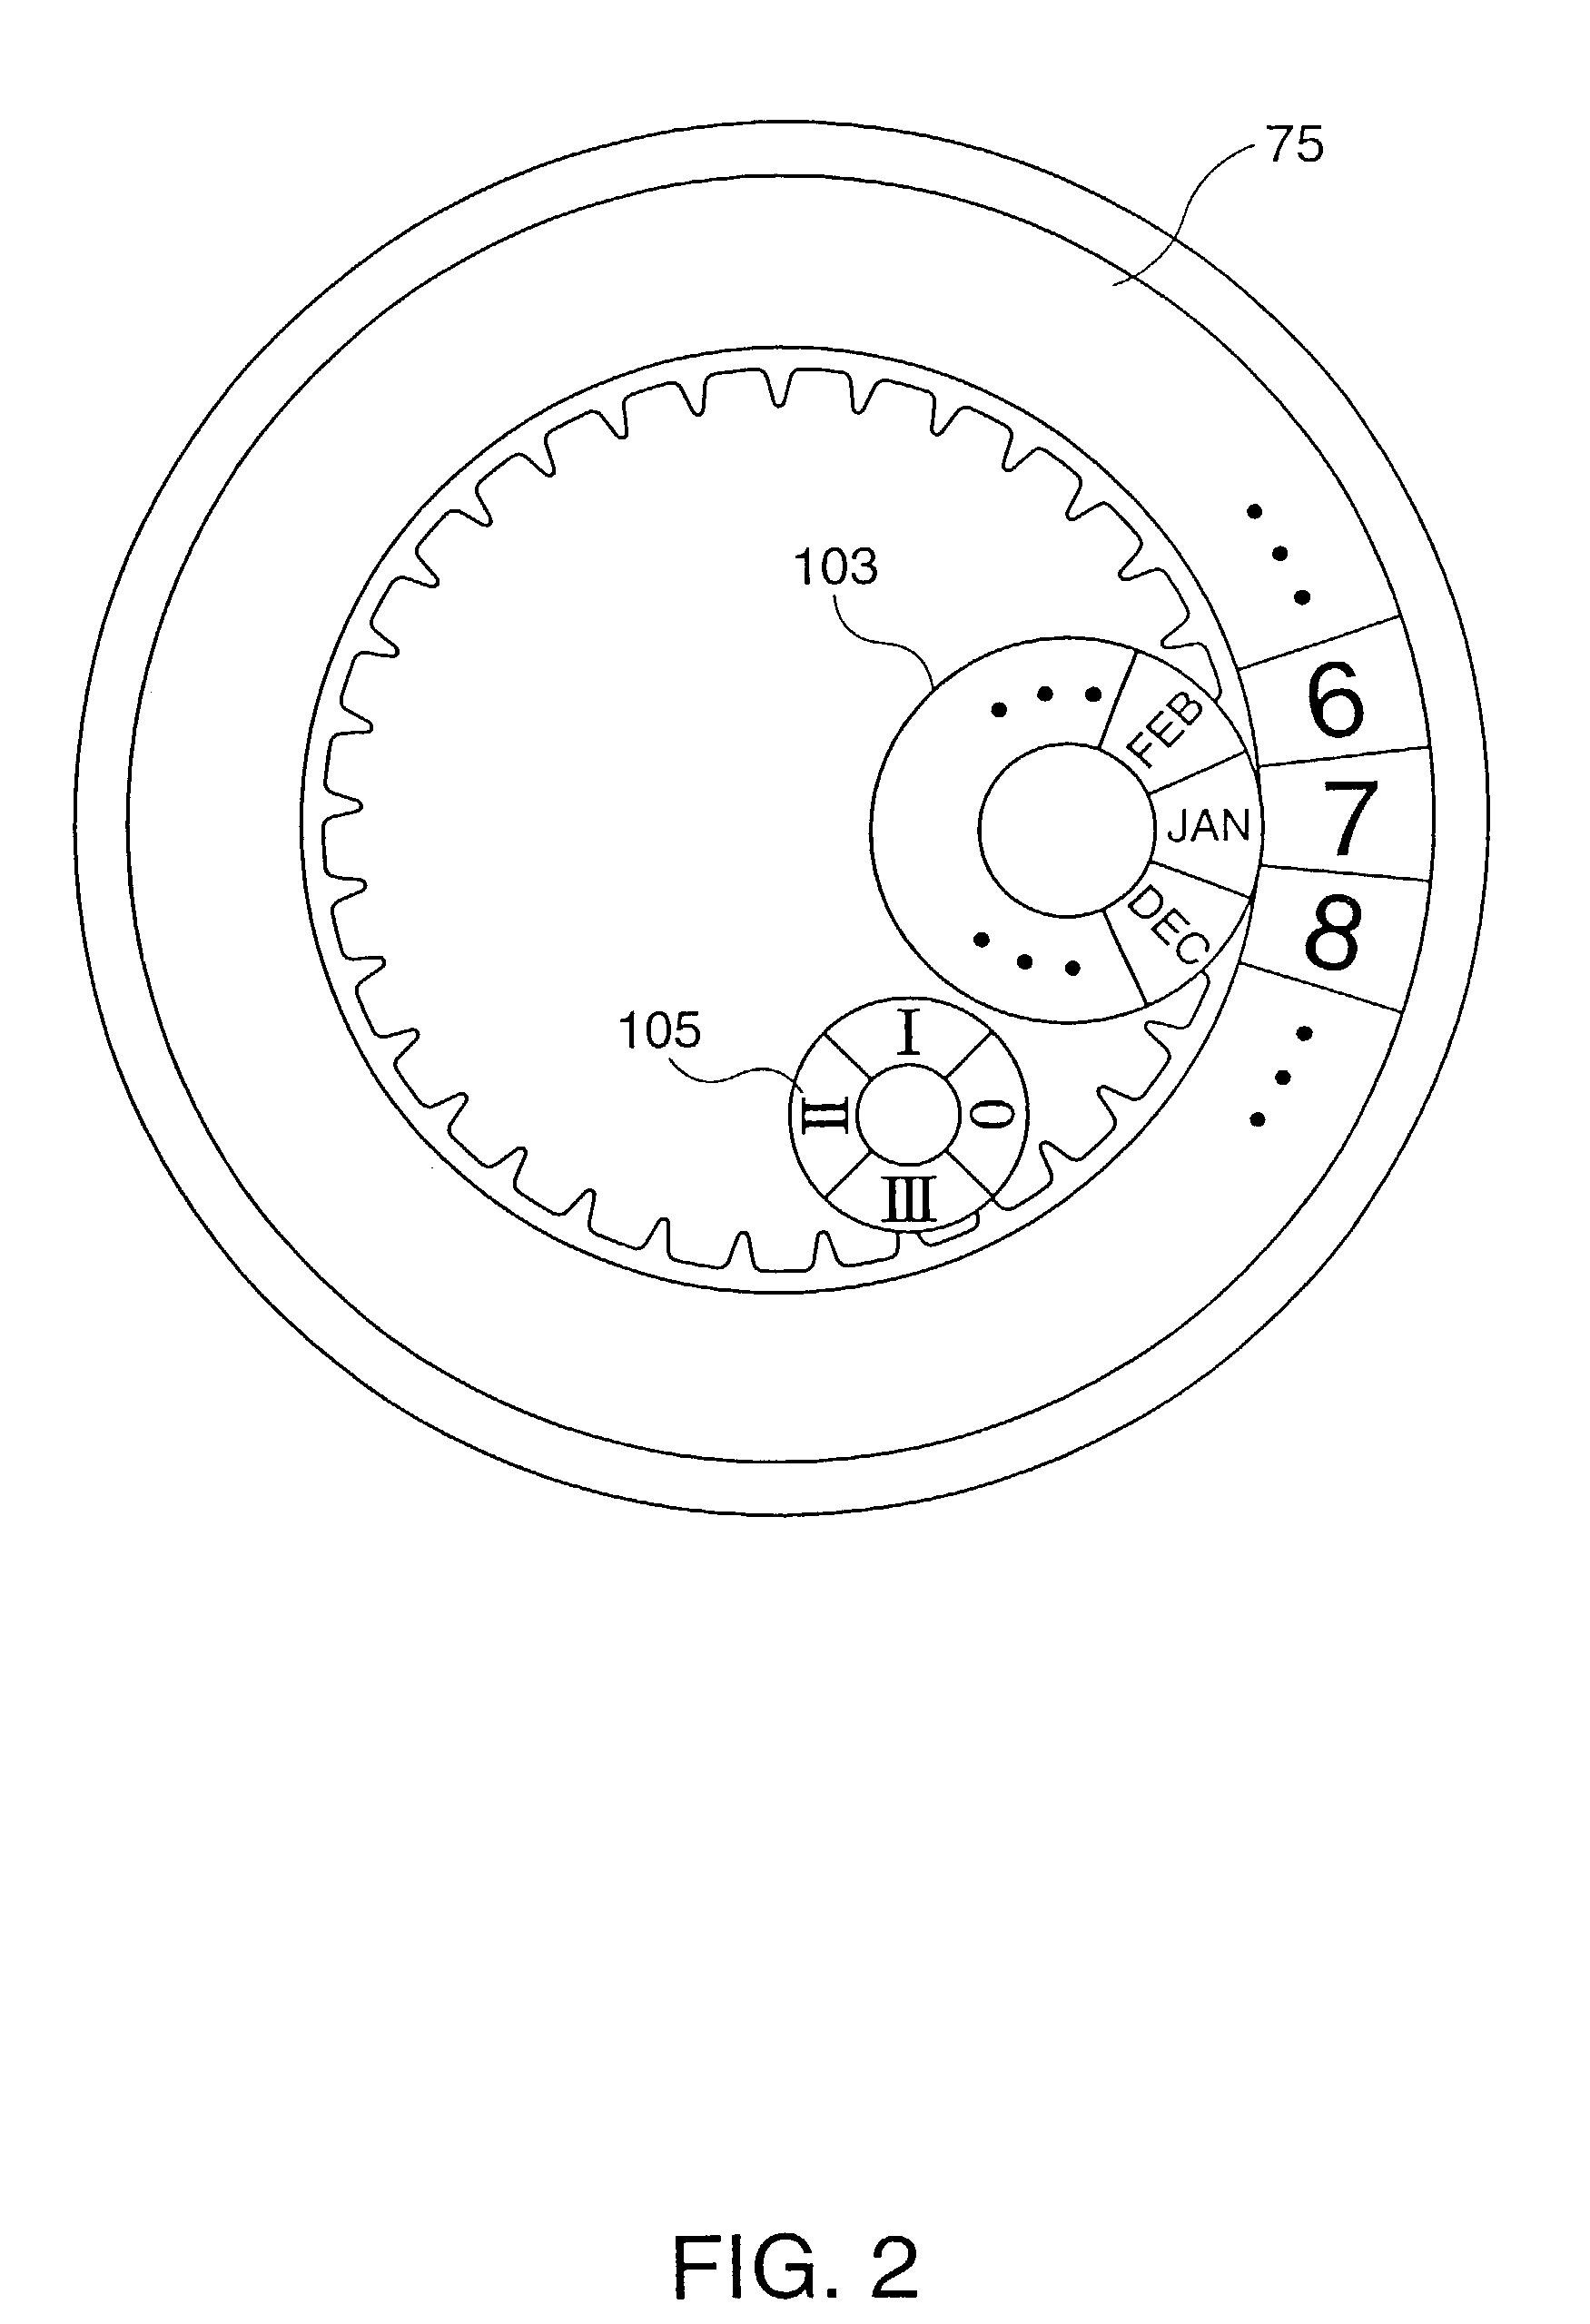 Electronic timepiece with a date display function